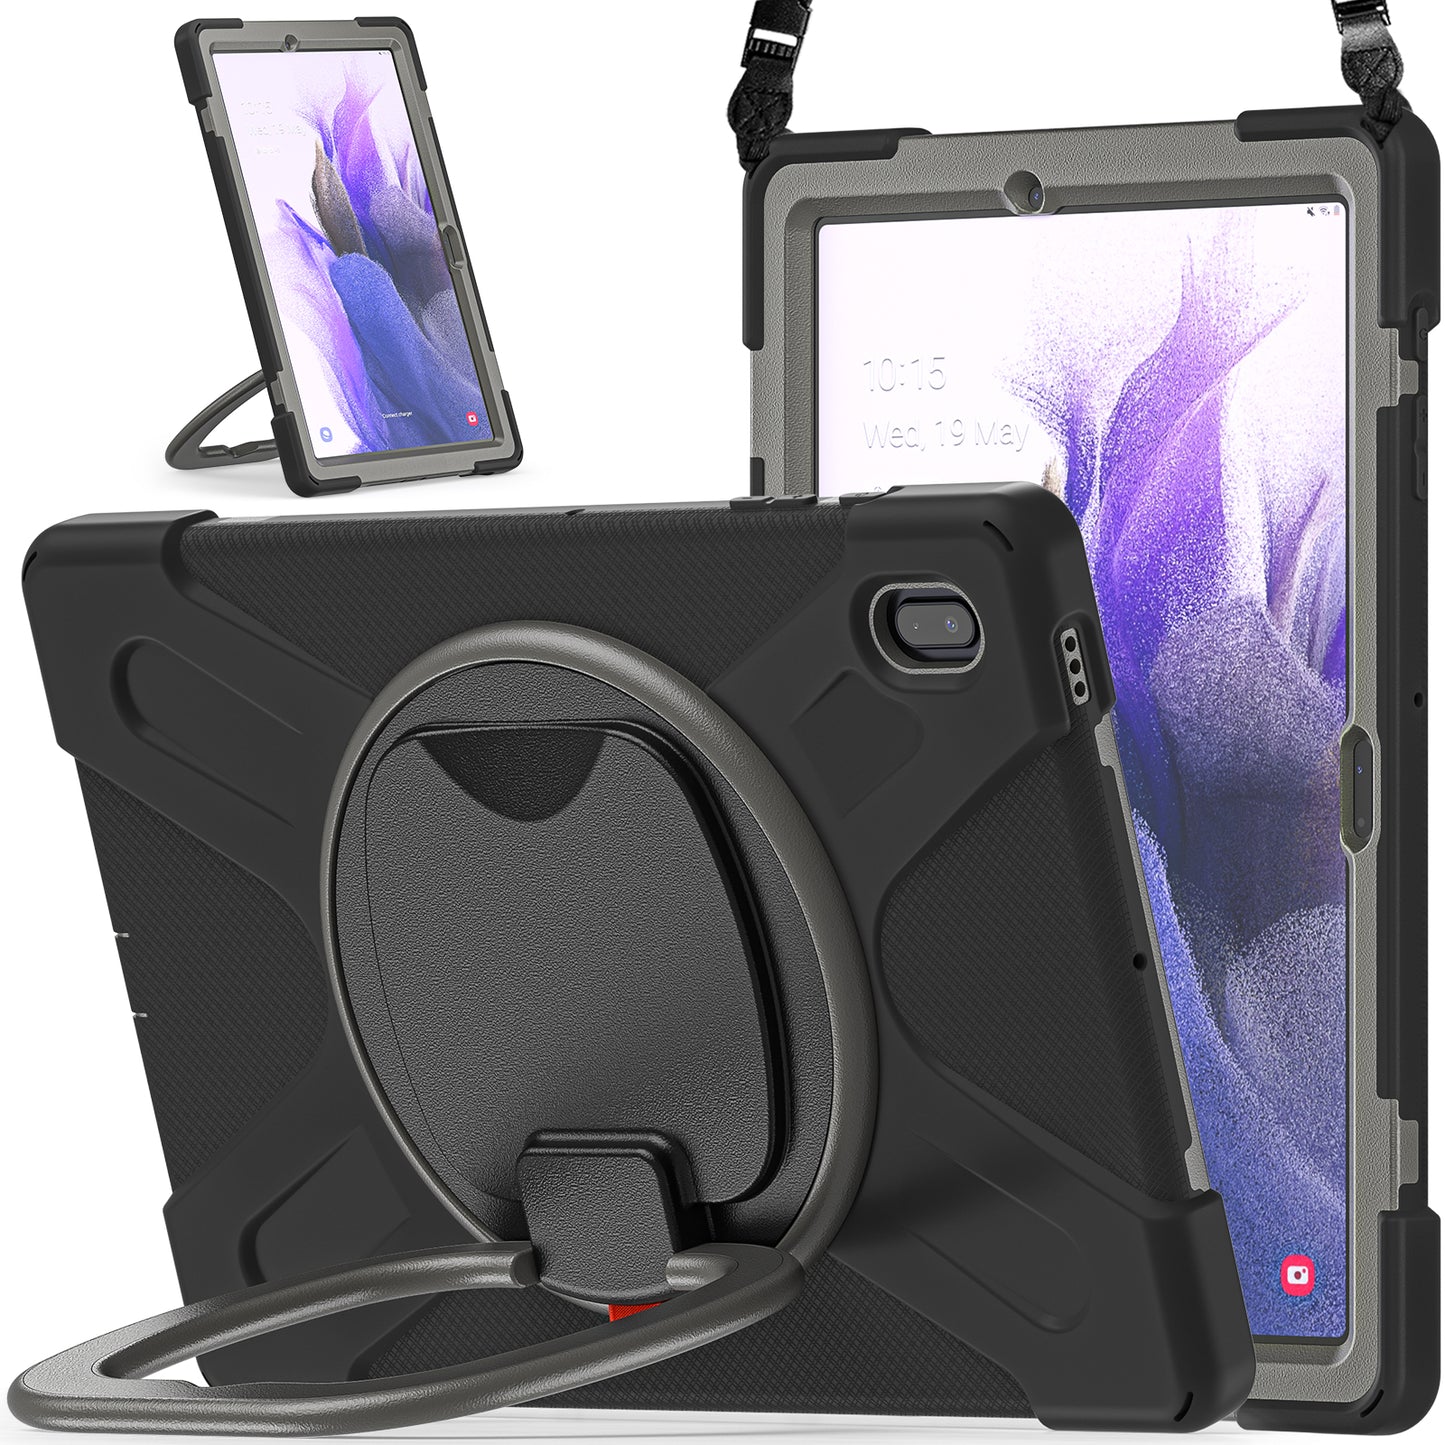 Pirate Box Galaxy Tab S7 FE Case Hook Stand Rotating Hand Holder Shoulder Strap